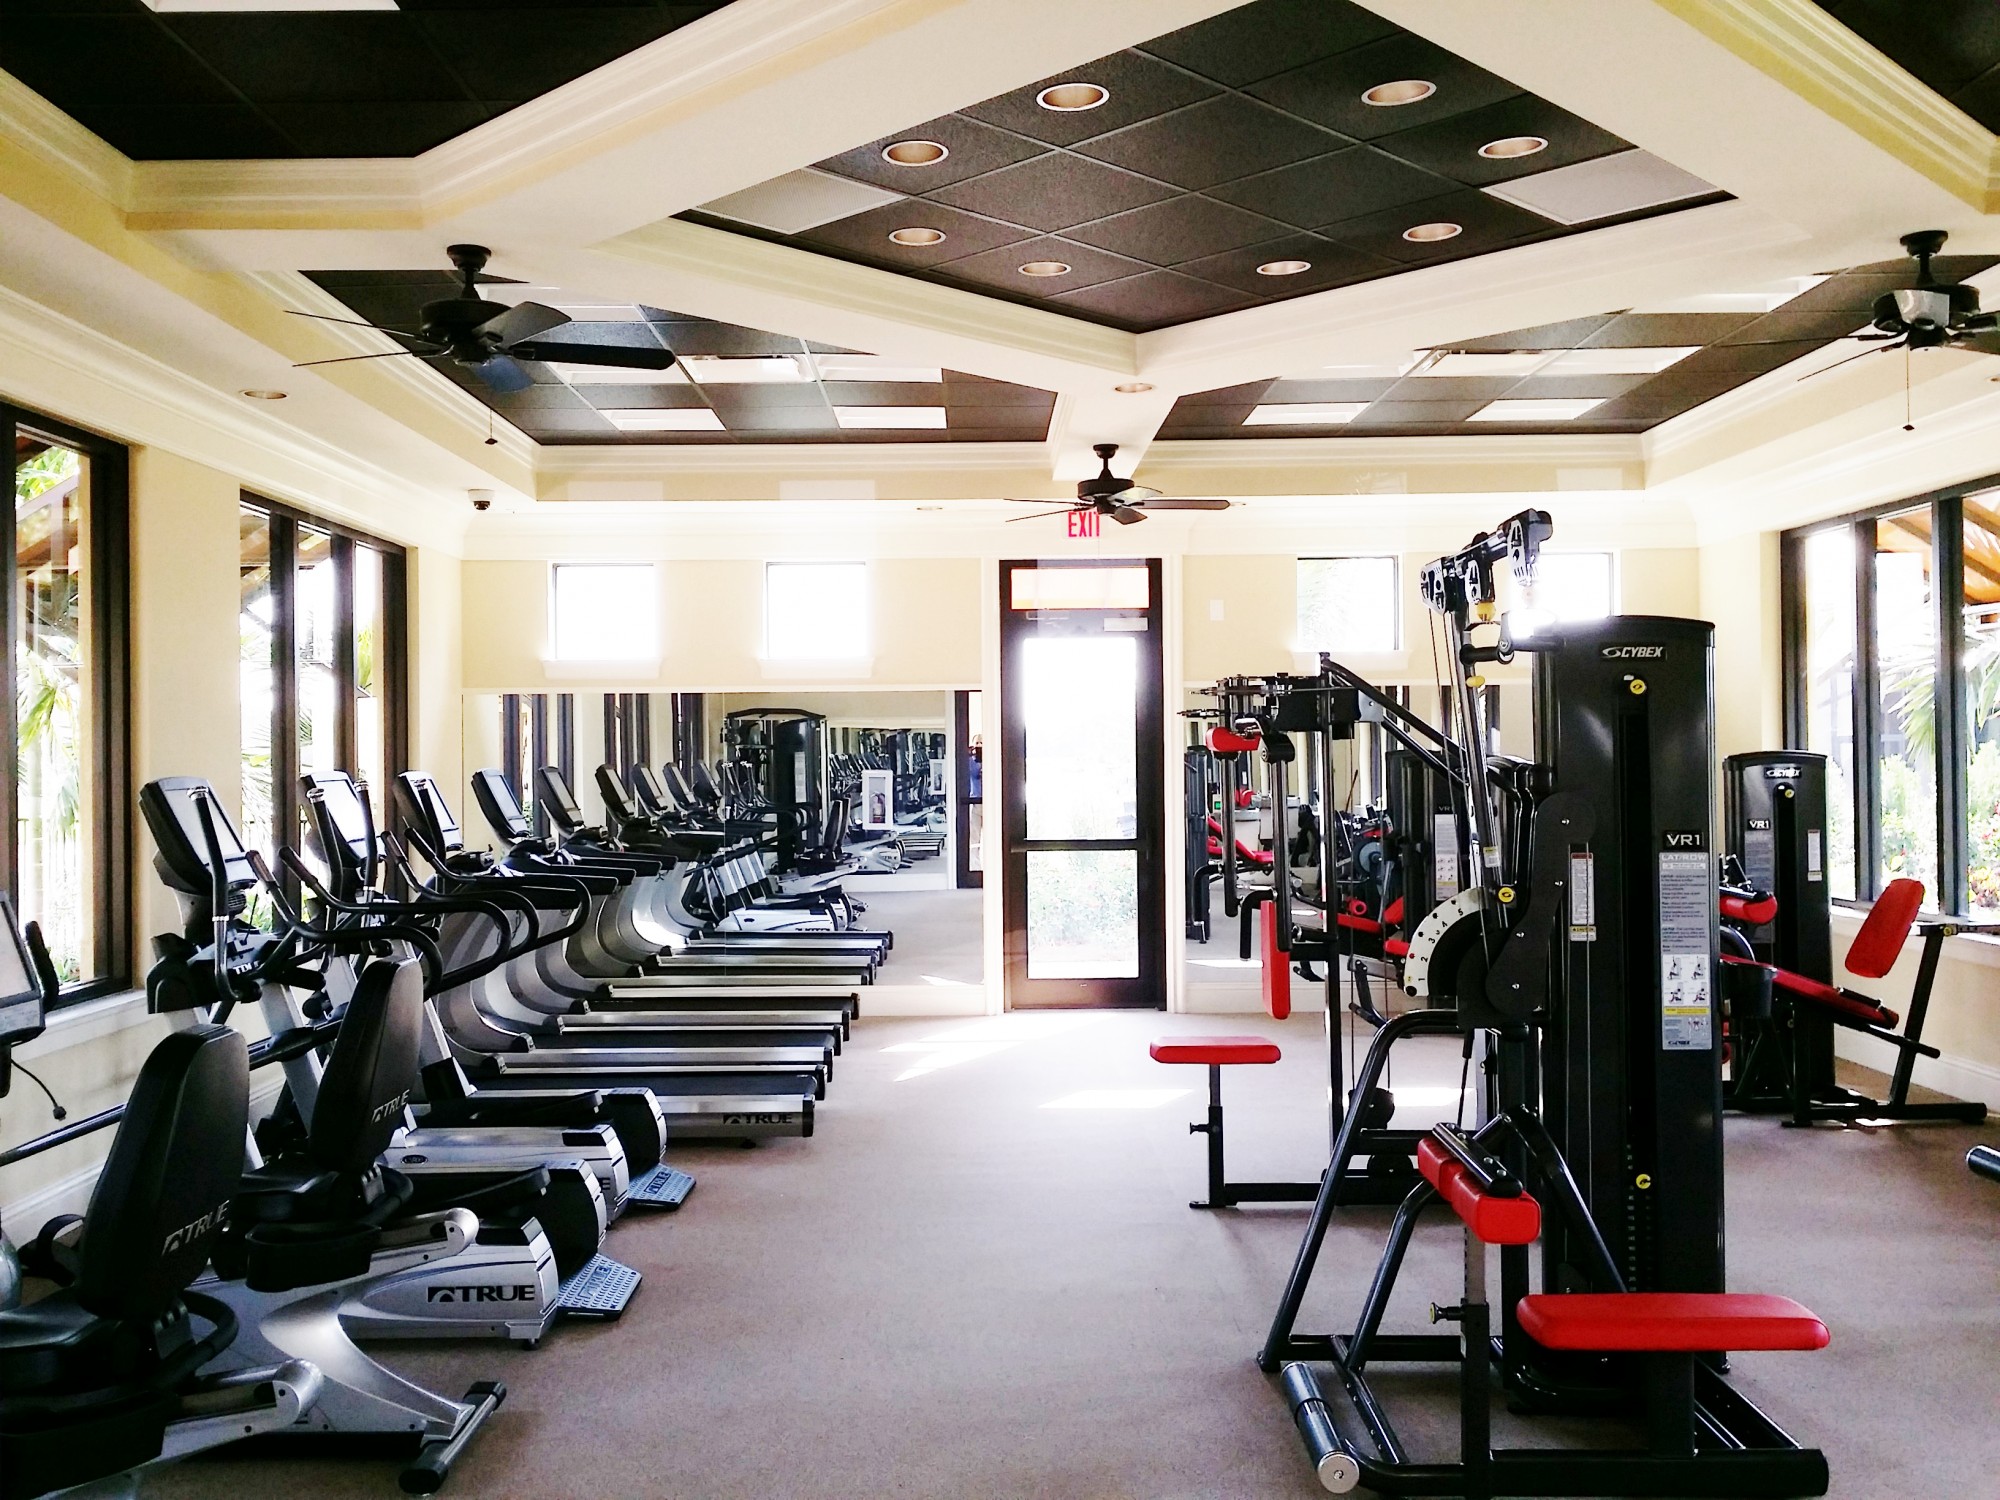 Workout at the Cybex Fitness Center!